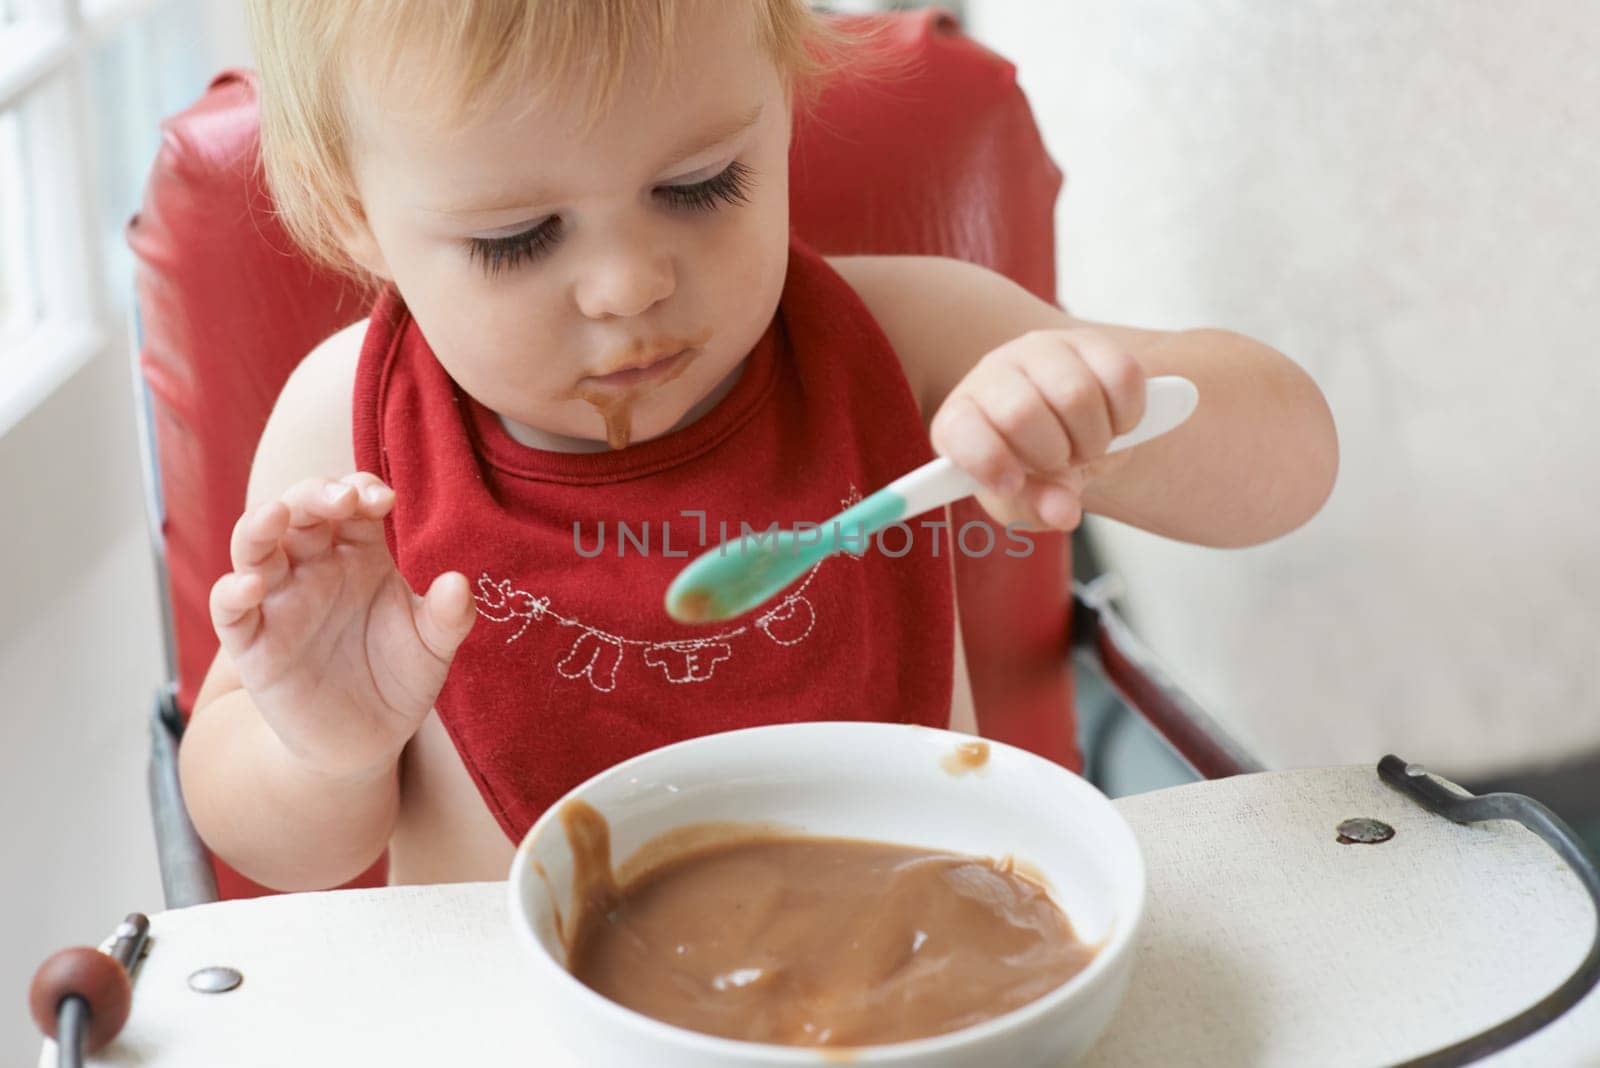 High chair meal, baby and eating spoon in a house with diet, nutrition and child, wellness or development. Food, messy eater and boy kid curious about breakfast cereal, playing or learning at home.